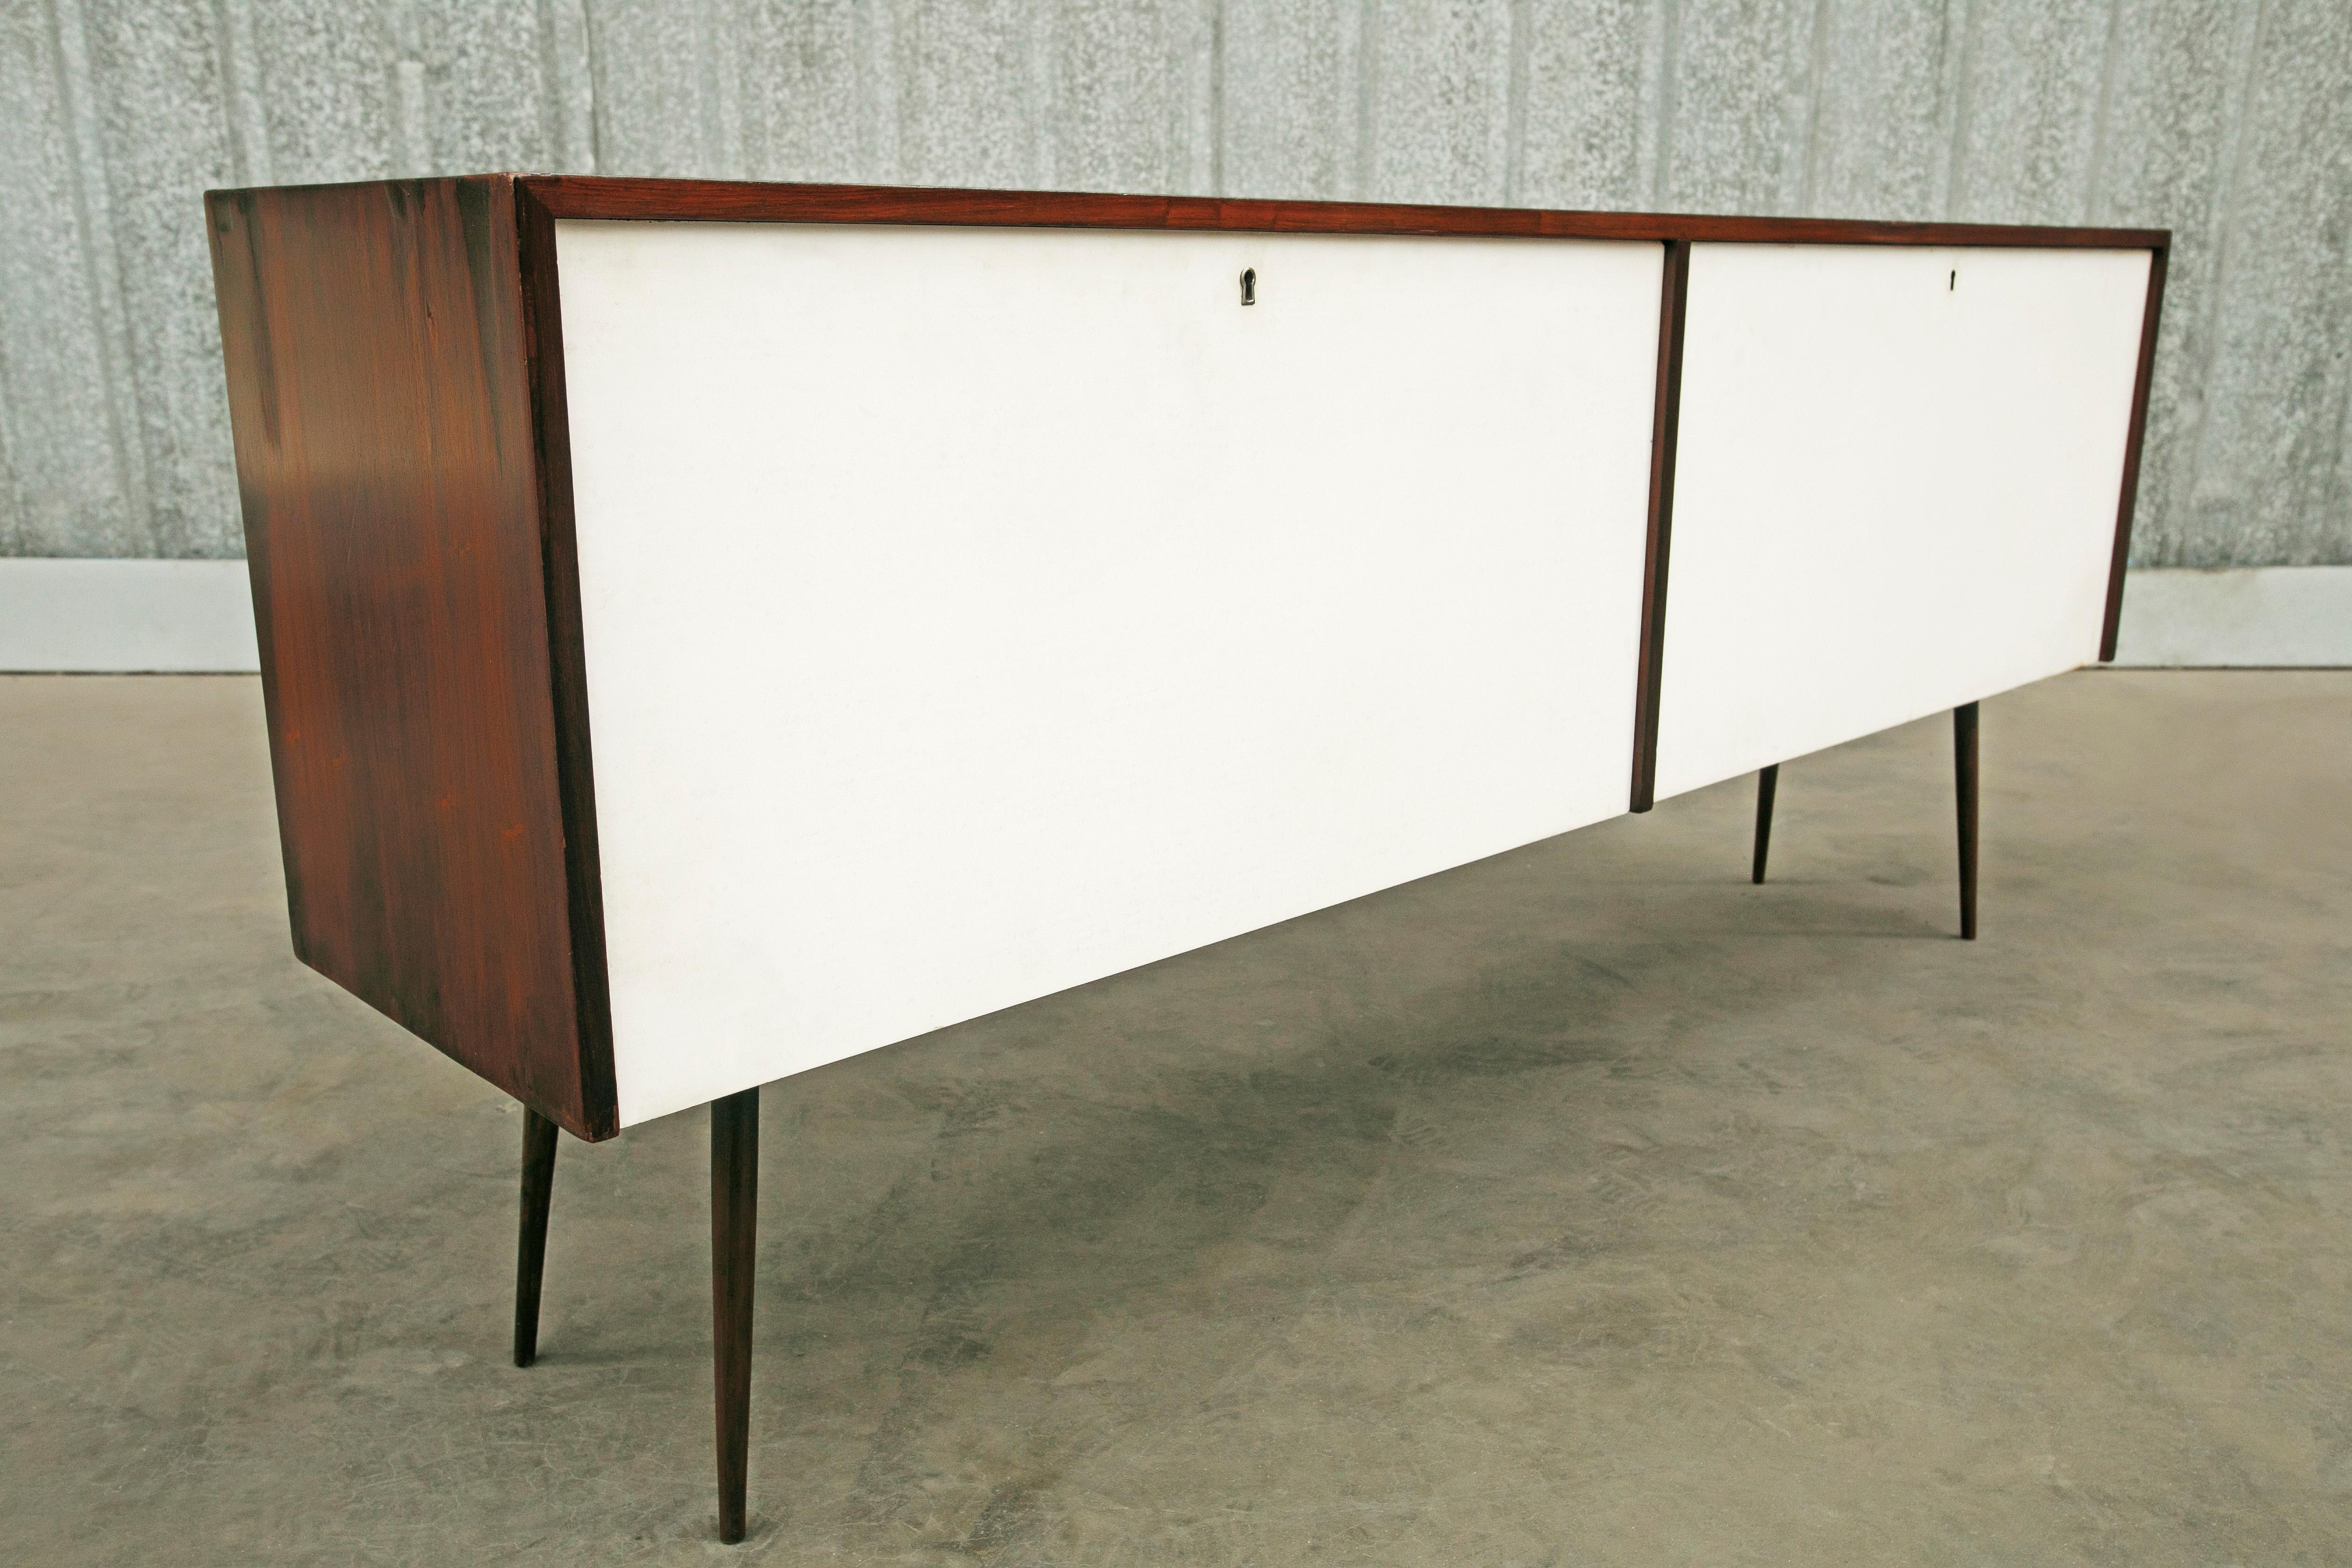 Woodwork Brazilian Modern Bar in Rosewood and White Finish, by Forma, 1960s, Brazil For Sale